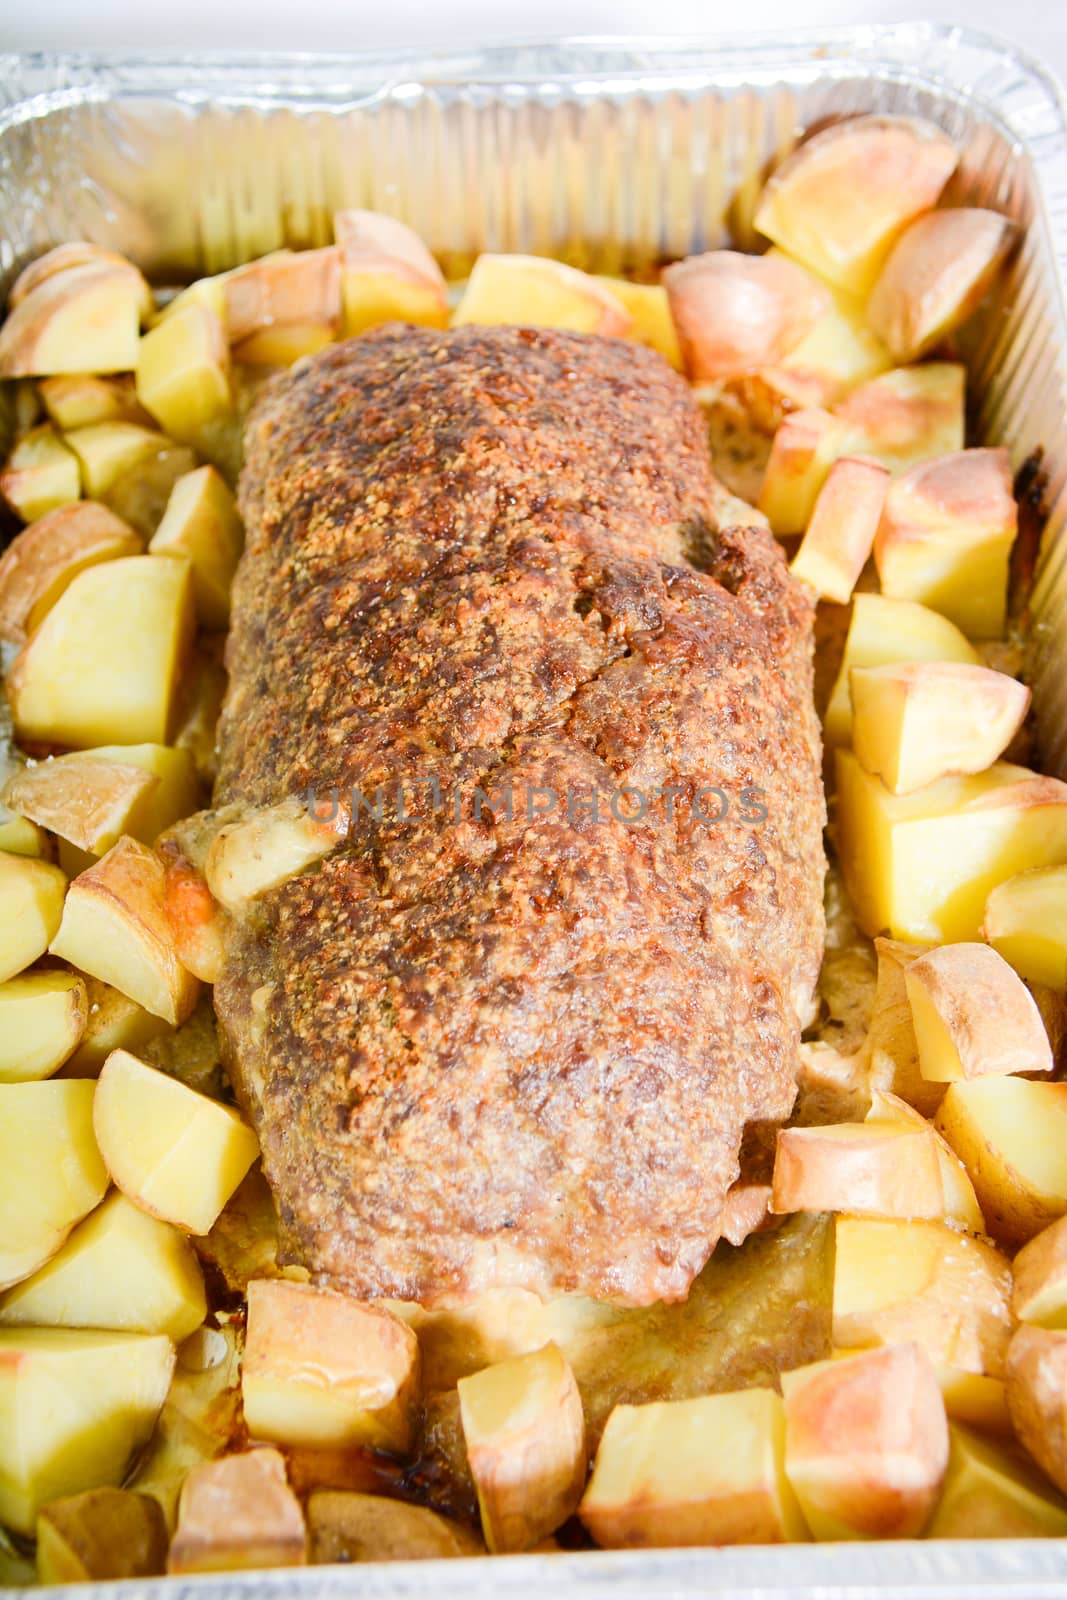 Italian meat loaf with cheese and mortadella